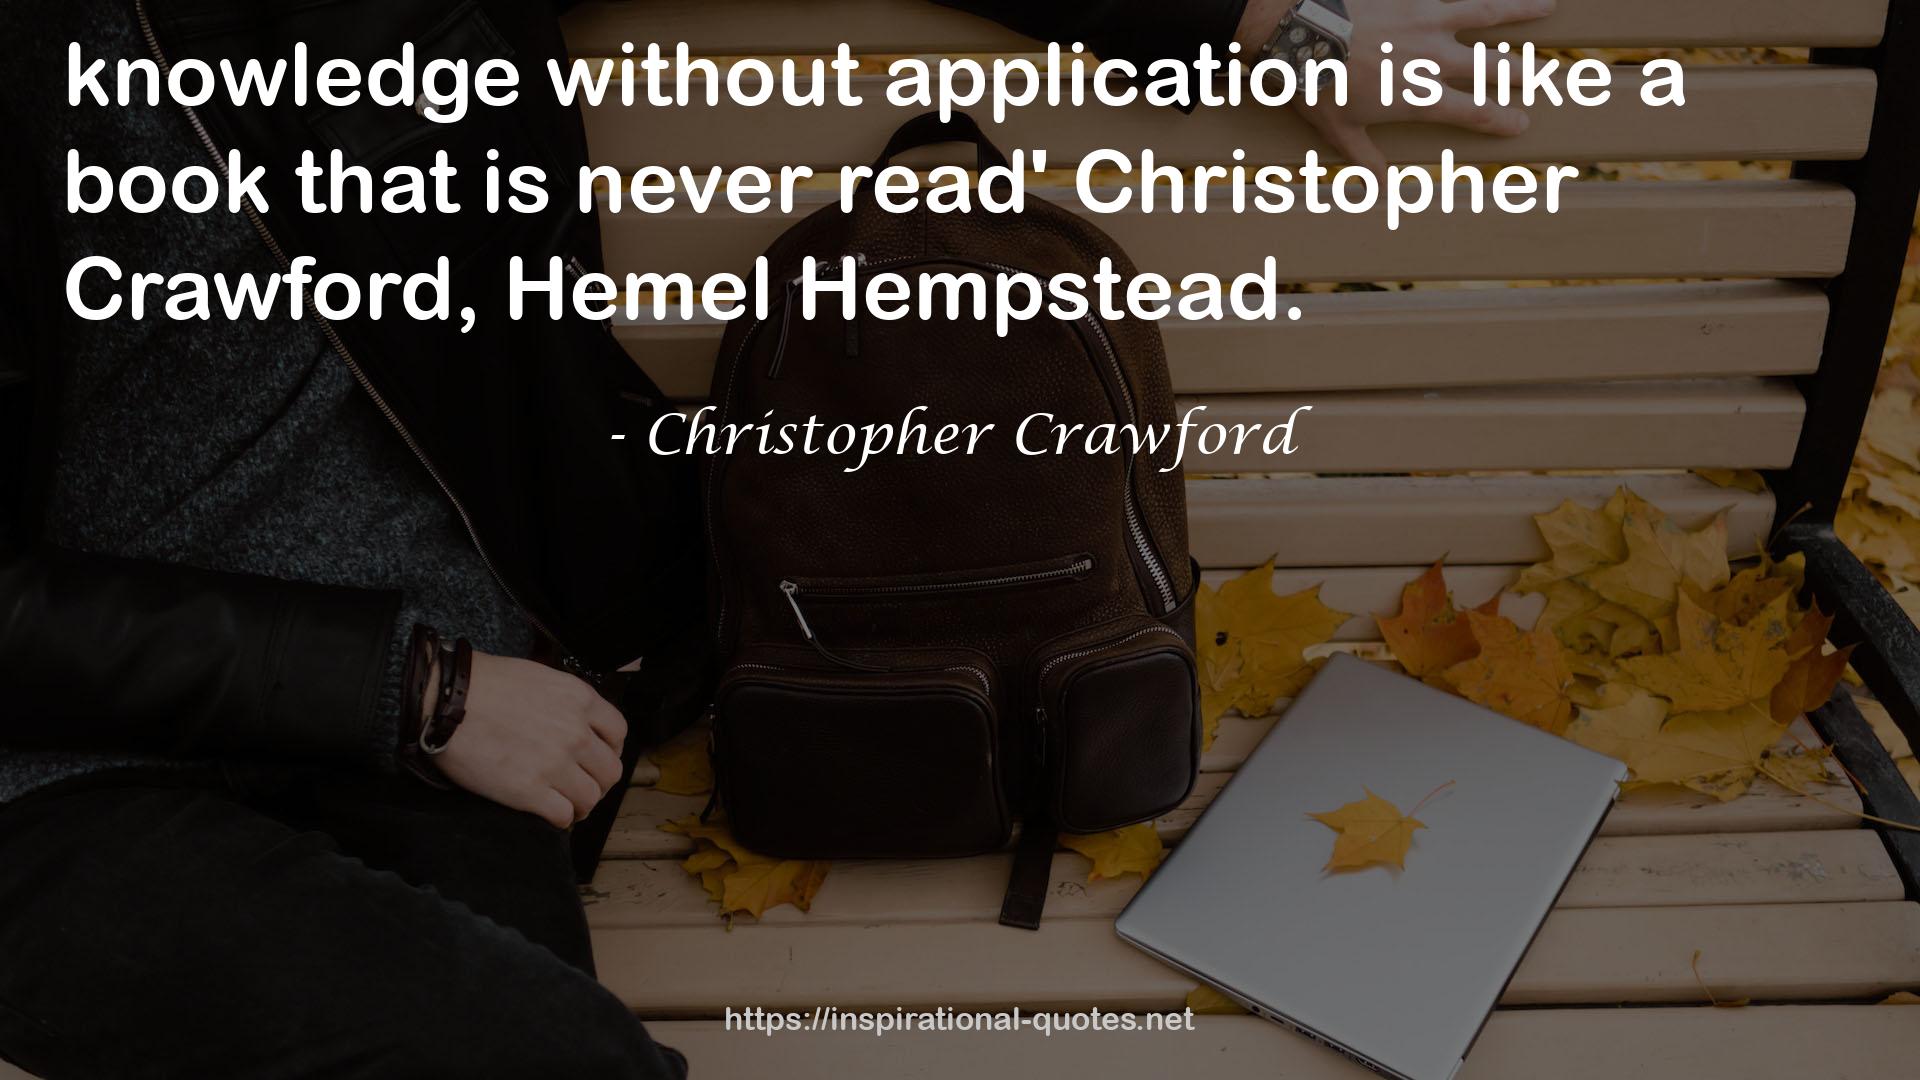 Christopher Crawford QUOTES